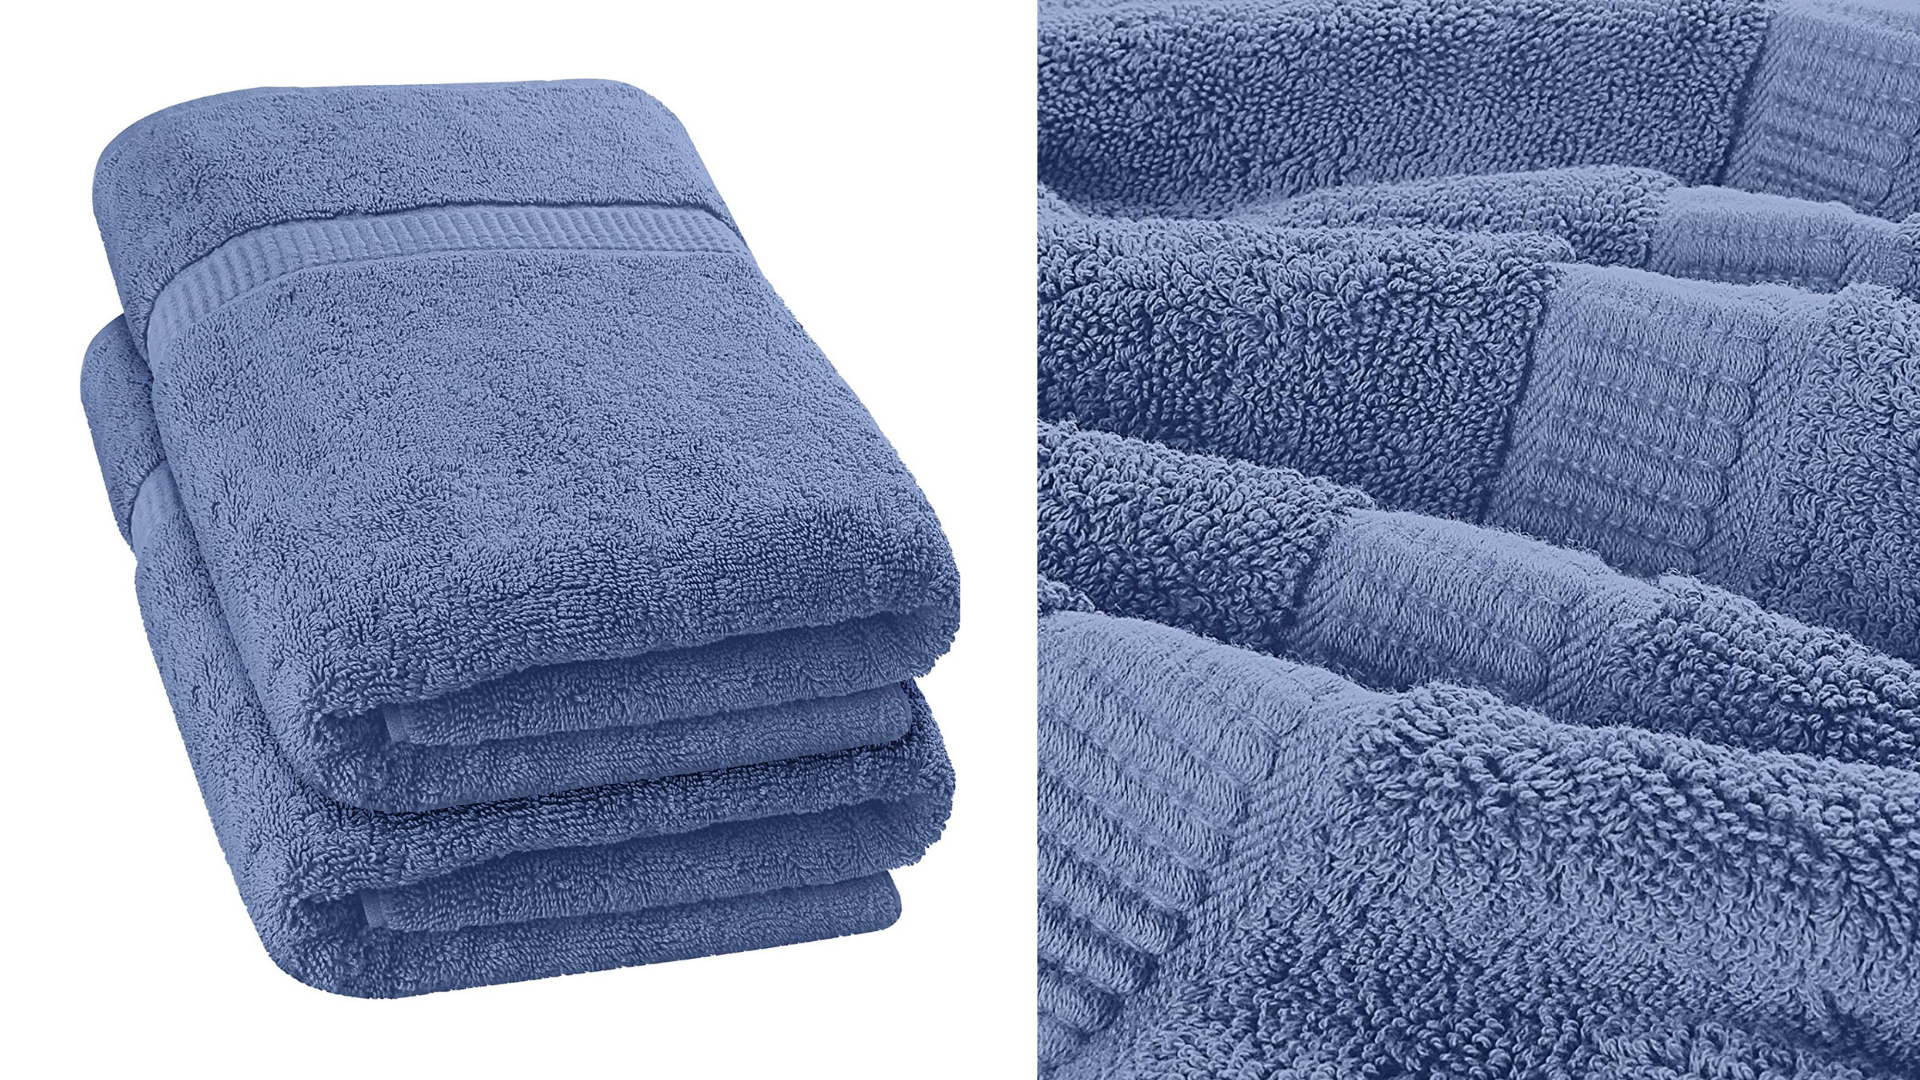 Plush Bath Sheet Set of 2 Oversize Thick Cotton Towels Many Colors Woven Borders 